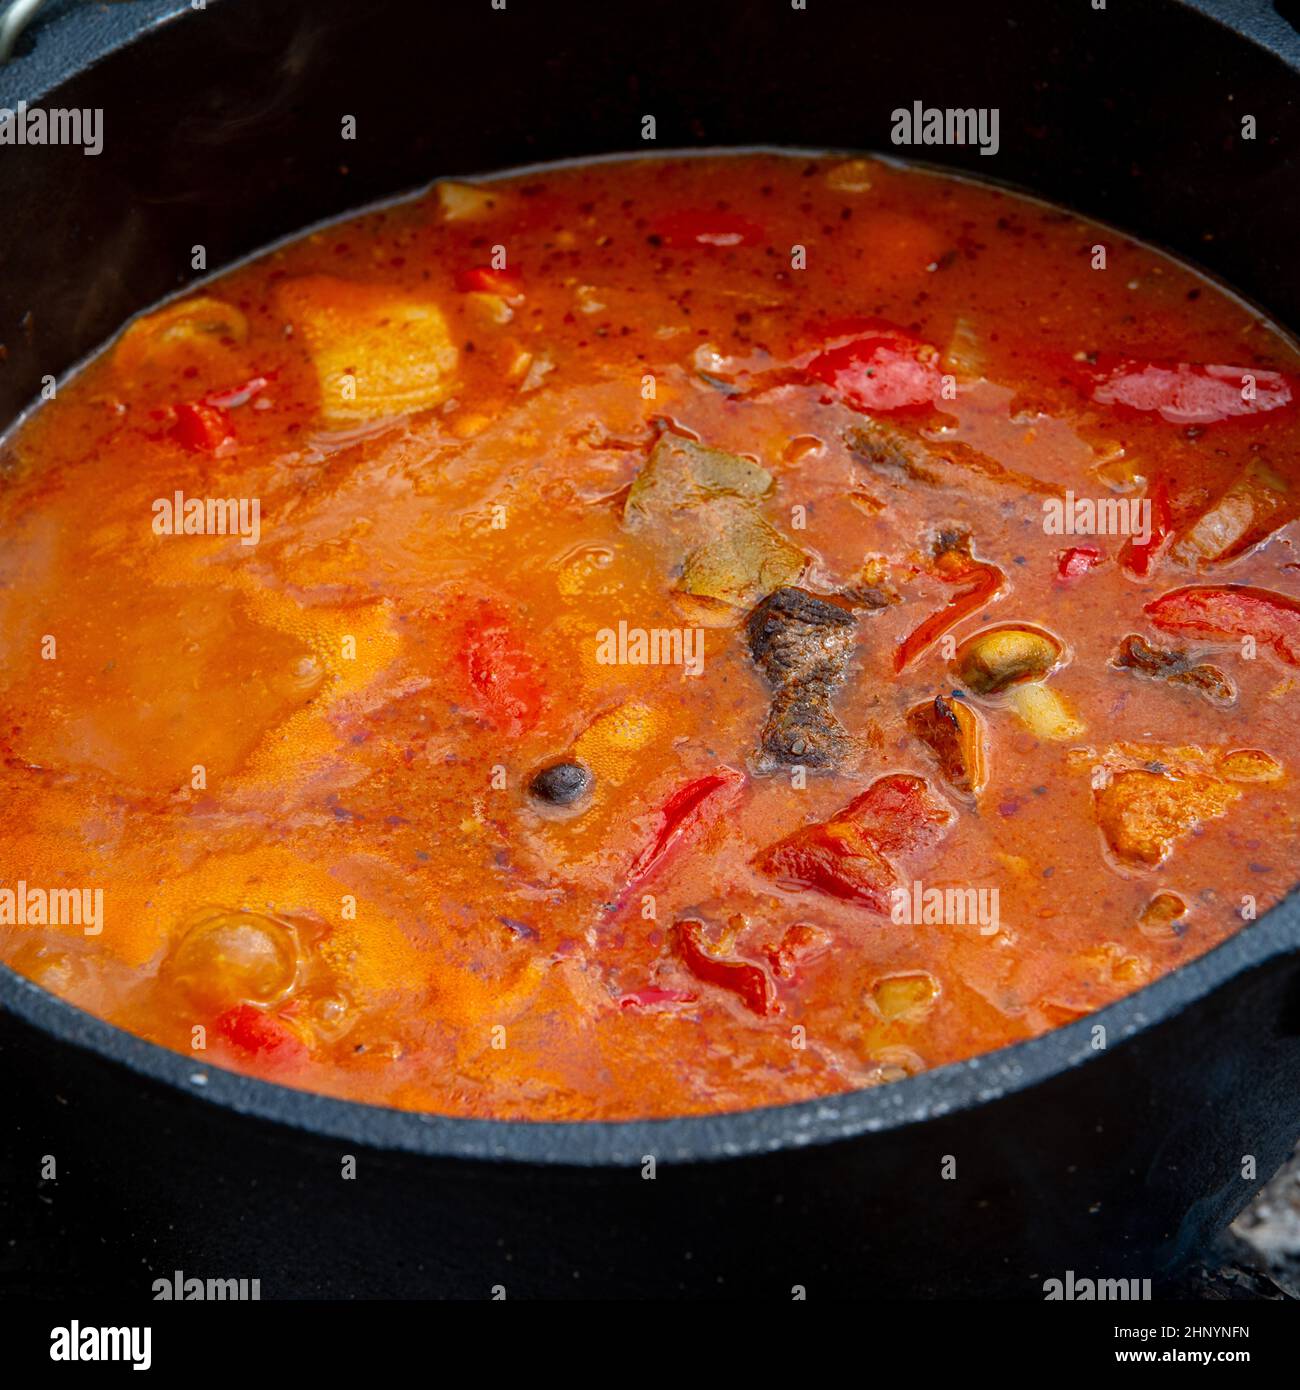 Kettle goulash is prepared over an open fire! Stock Photo